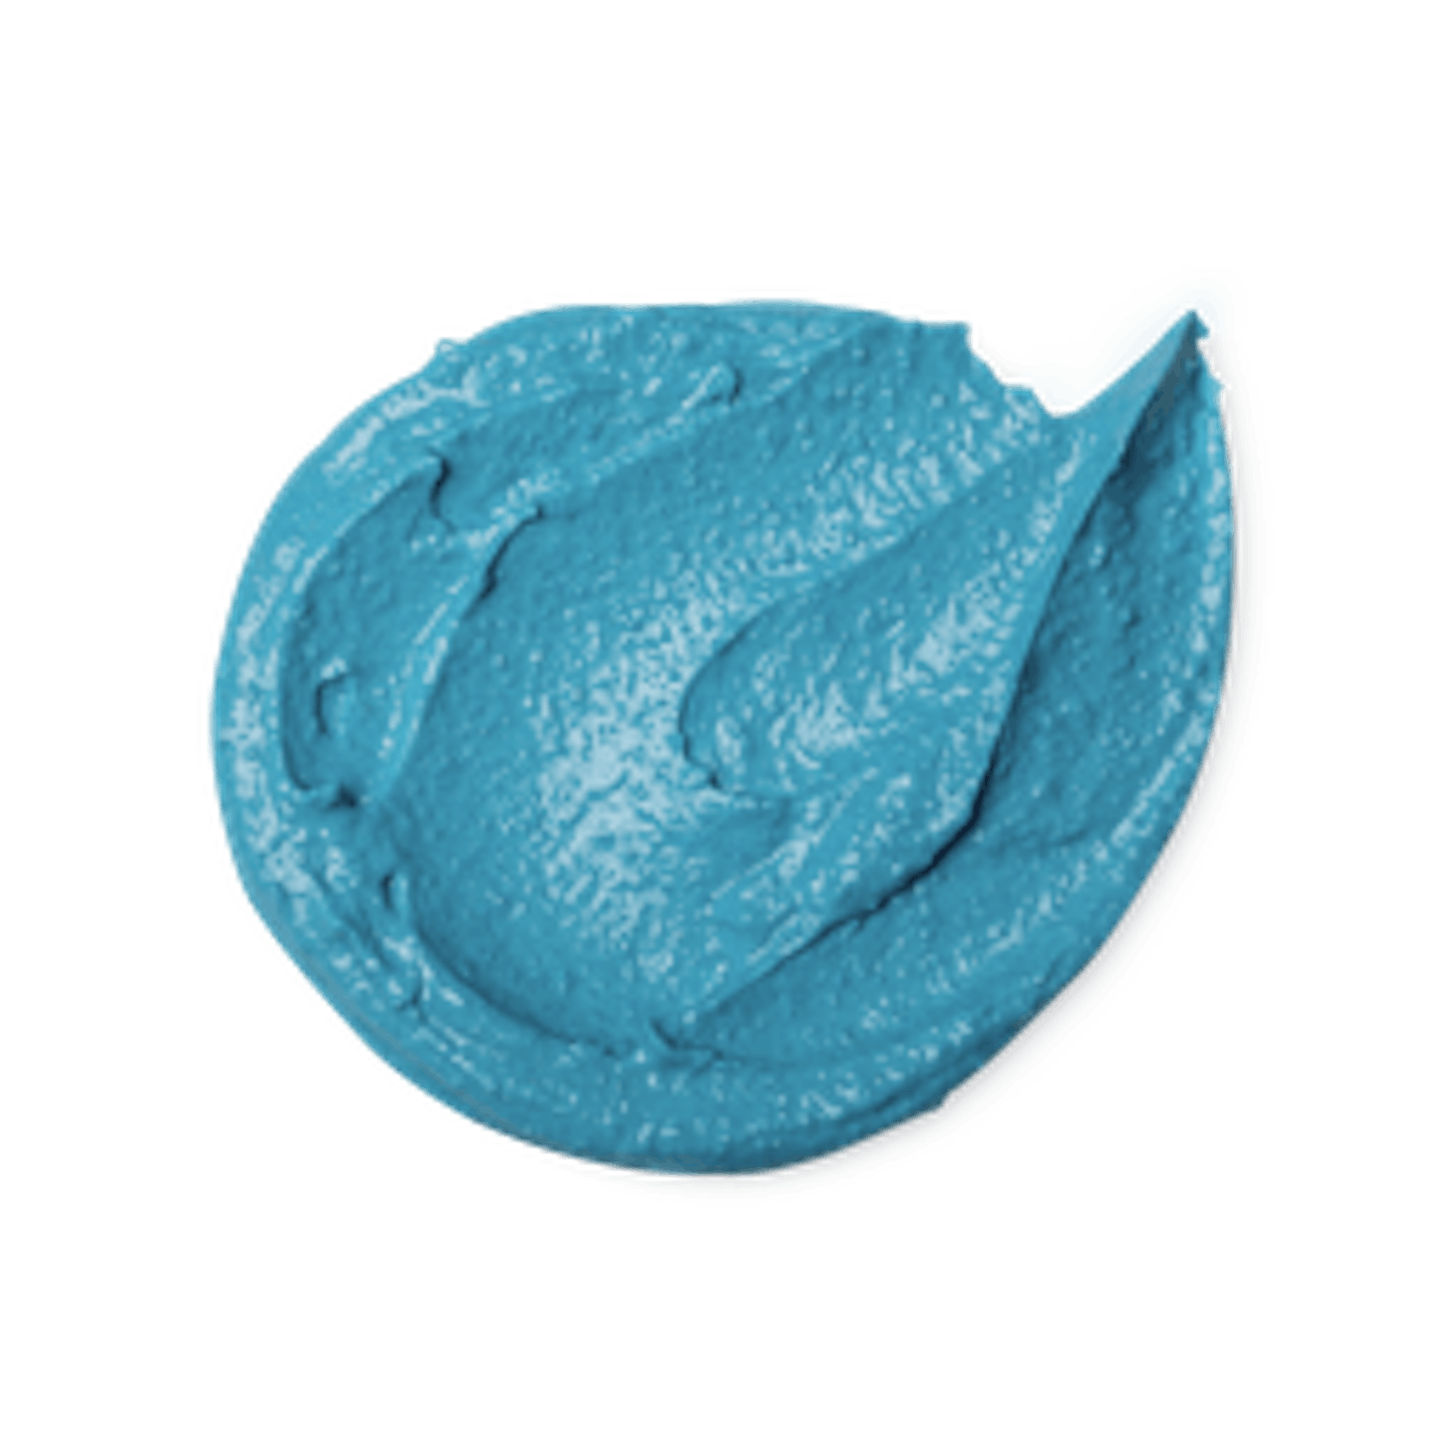 Best for all skin types: Lush Donu0026#039;t look at me mask